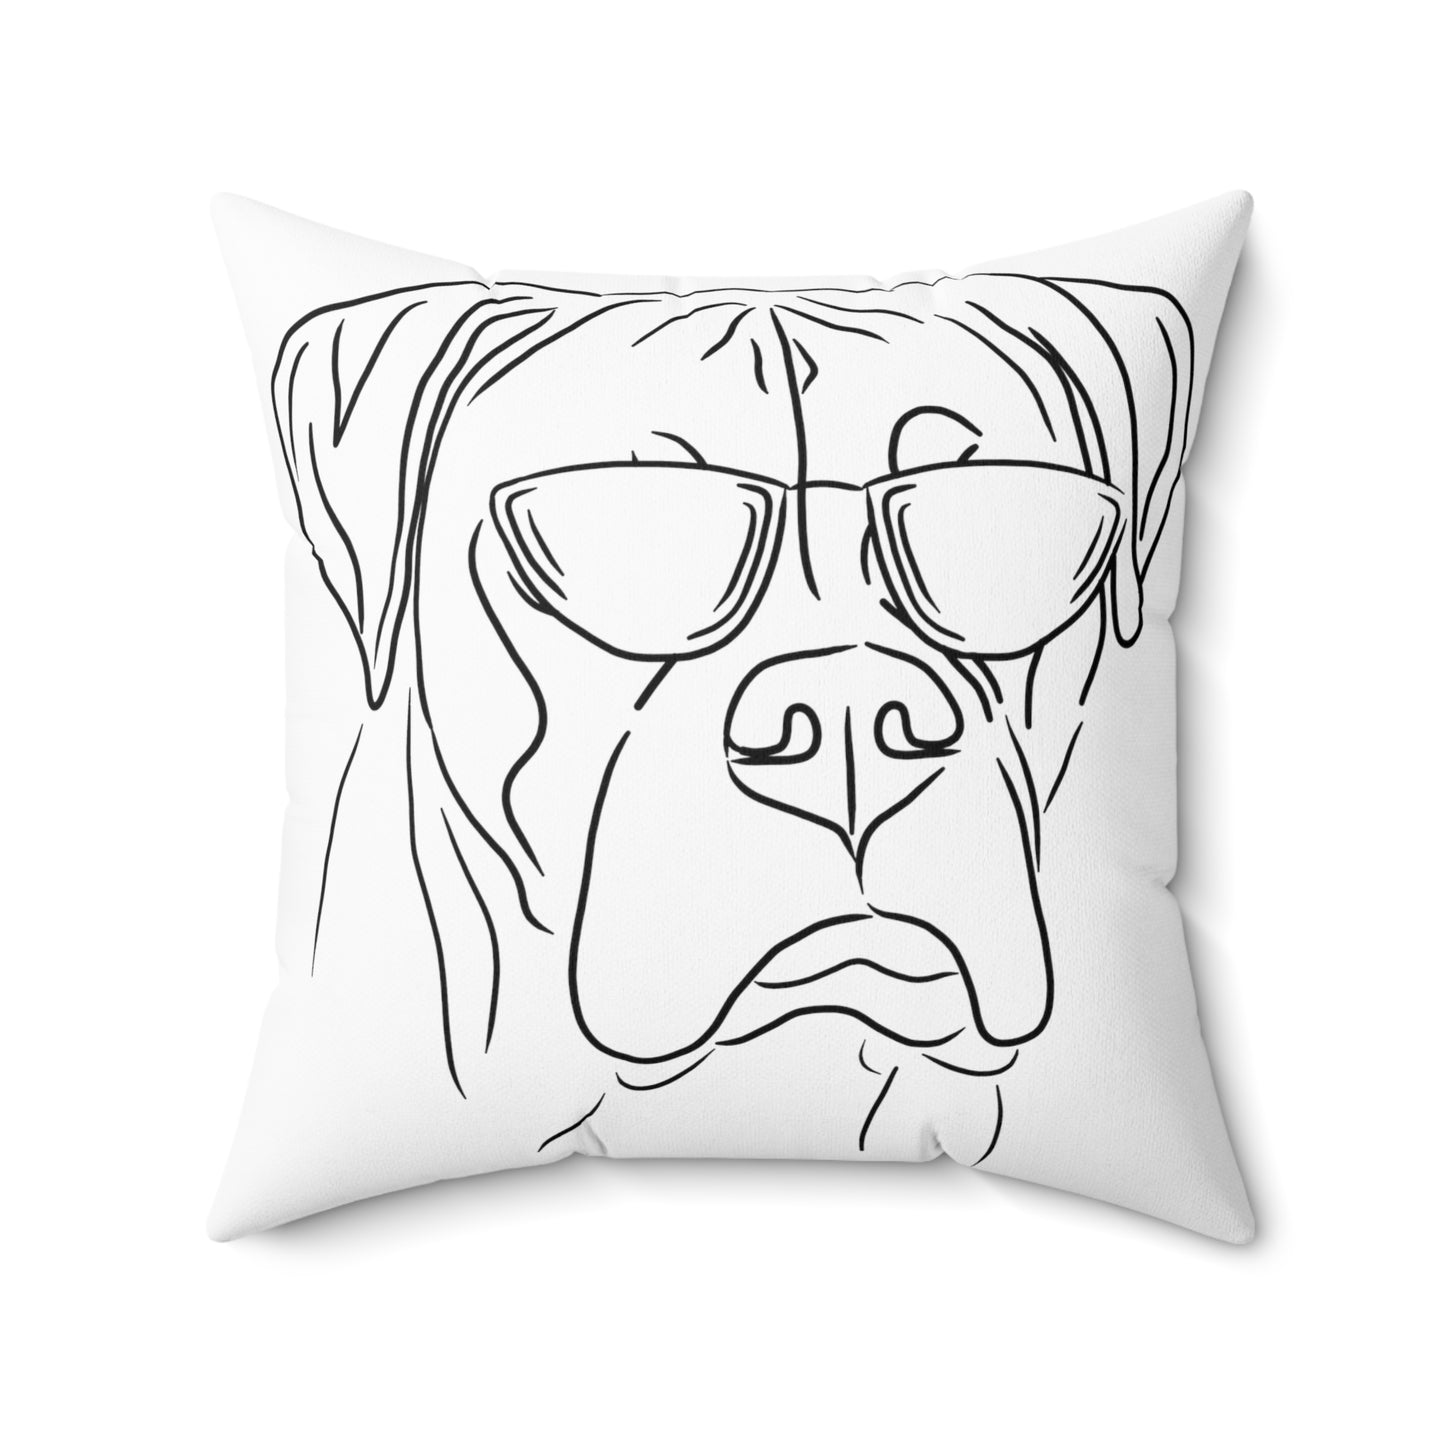 Boxer with sunglasses spun polyester square pillow honoring the coolness of Boxers everywhere